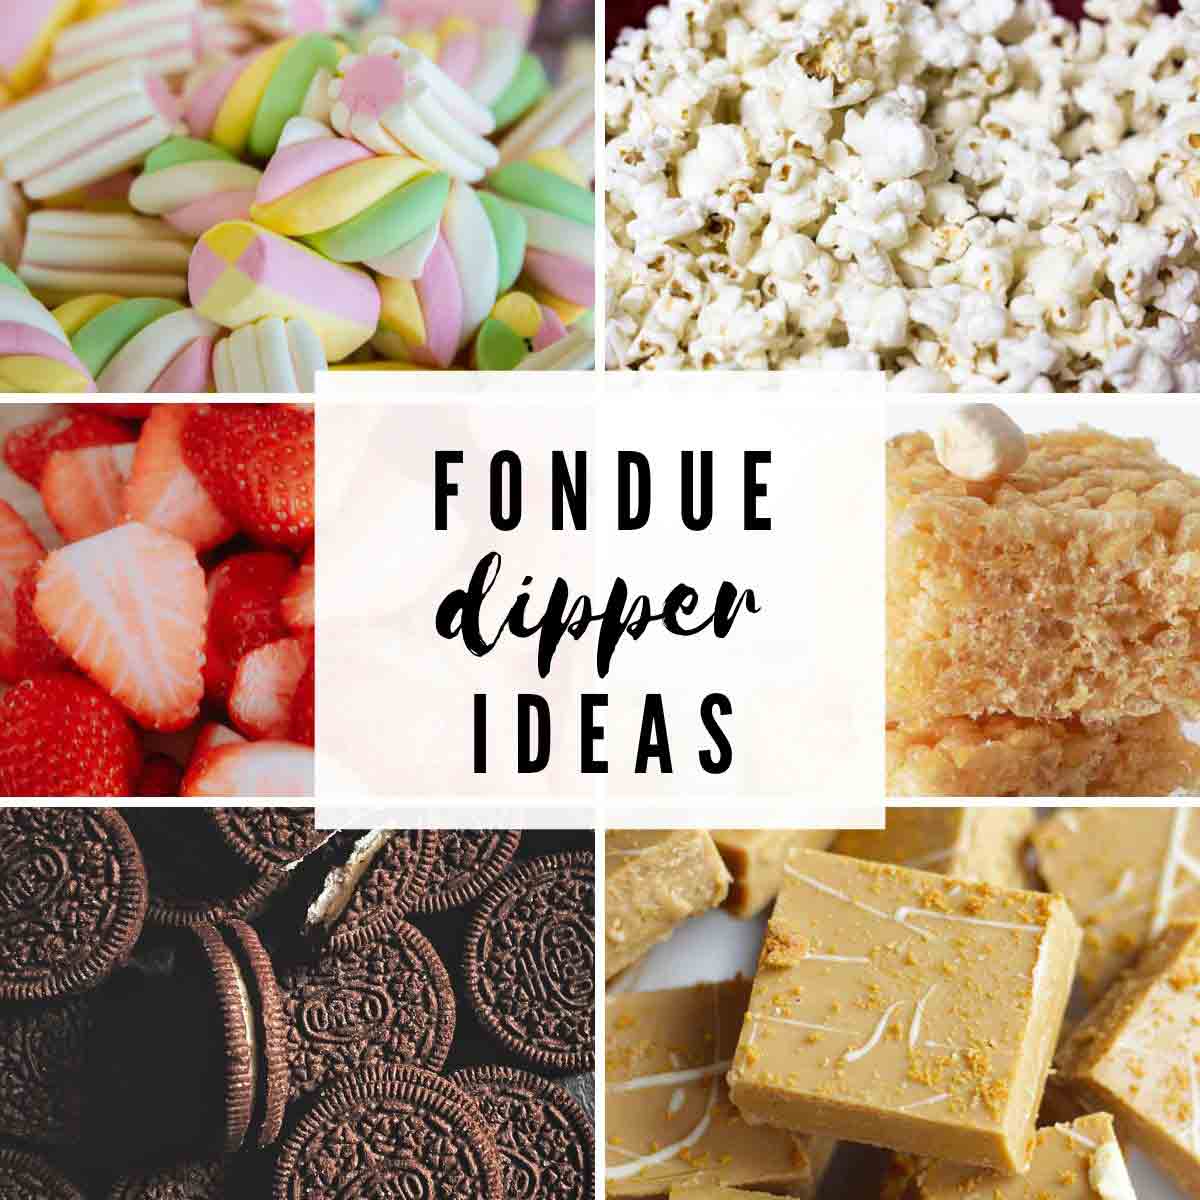 6 Images Of Different Fondue Dipper Ideas